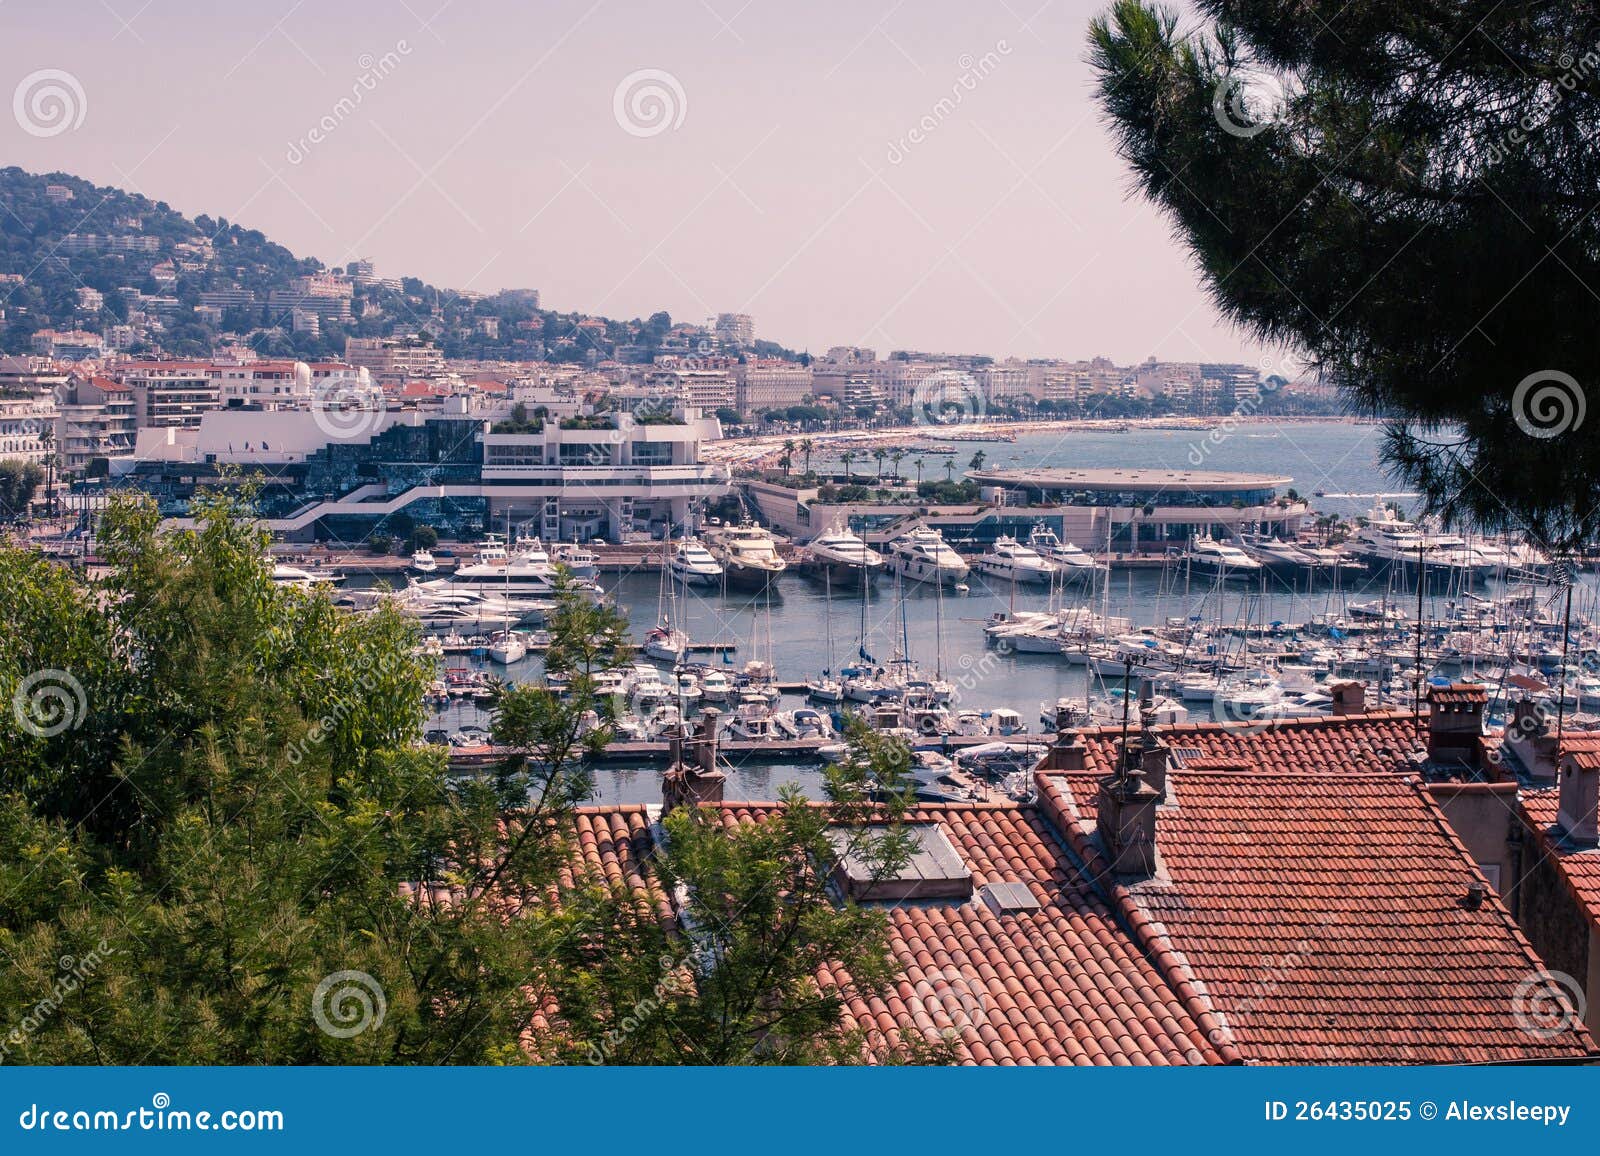 cannes marina south of france stock image - image of